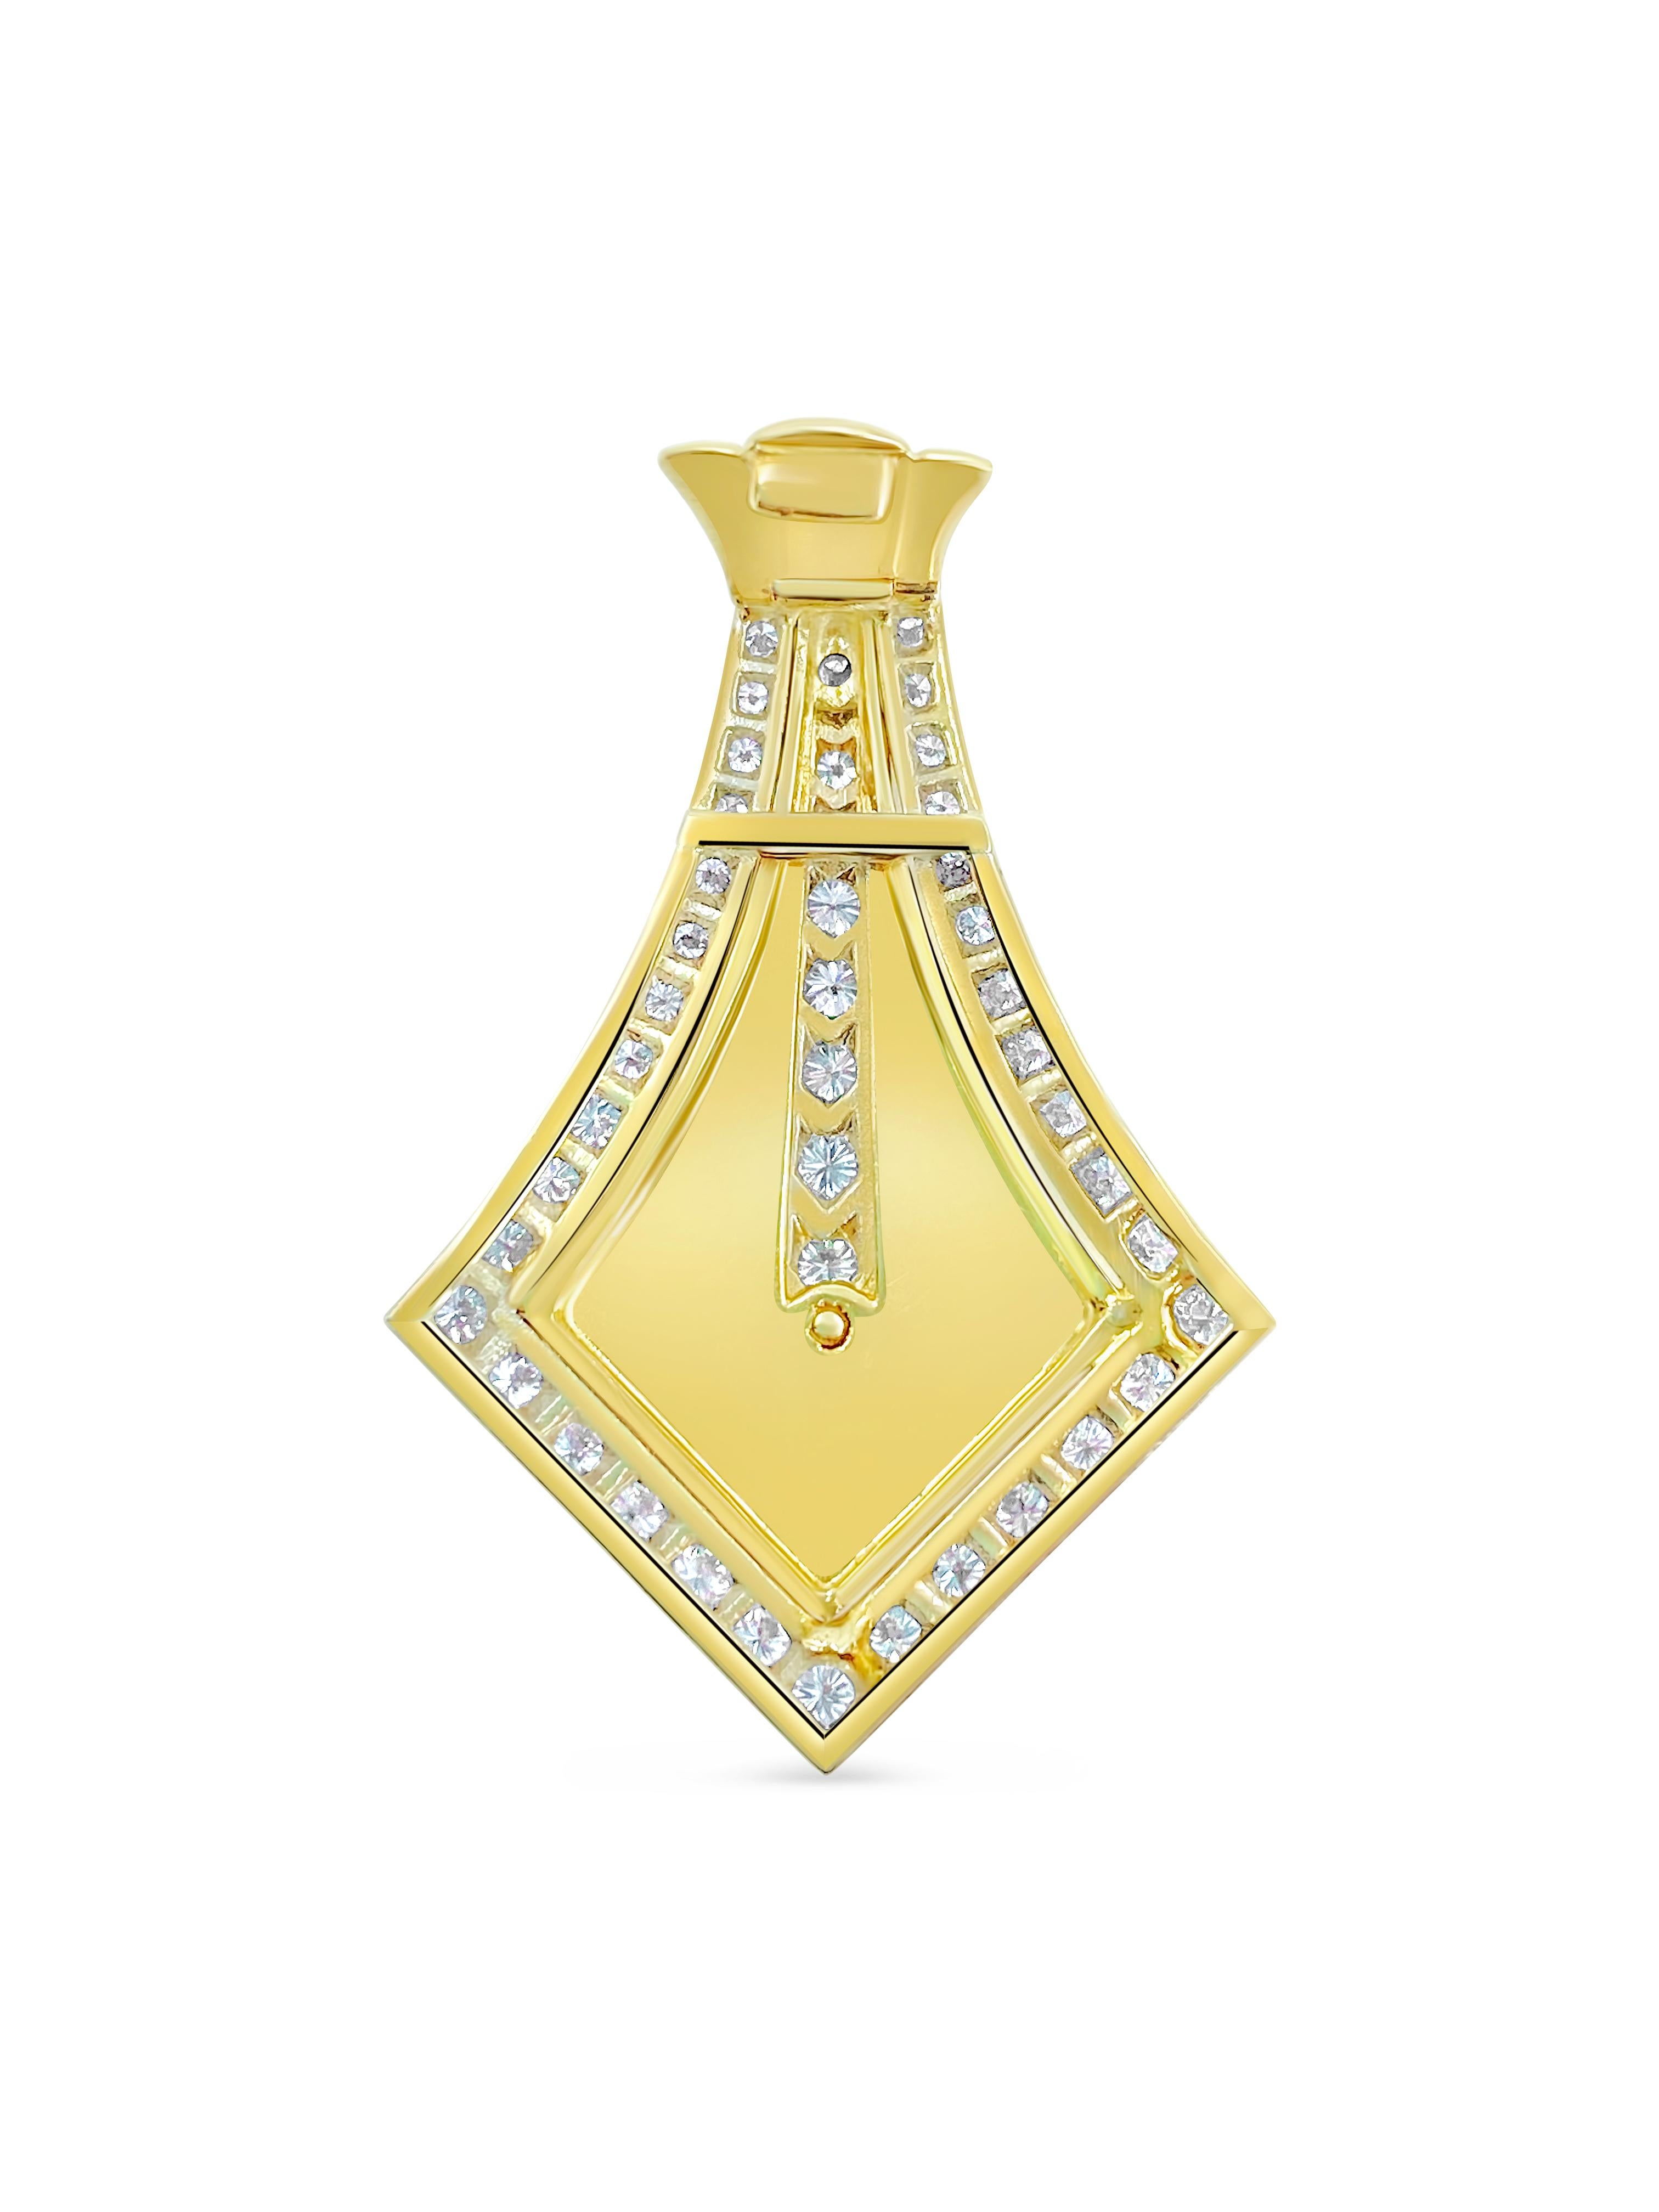 Vintage 3.04 Carat Diamond Pendant For Her In Excellent Condition For Sale In Miami, FL